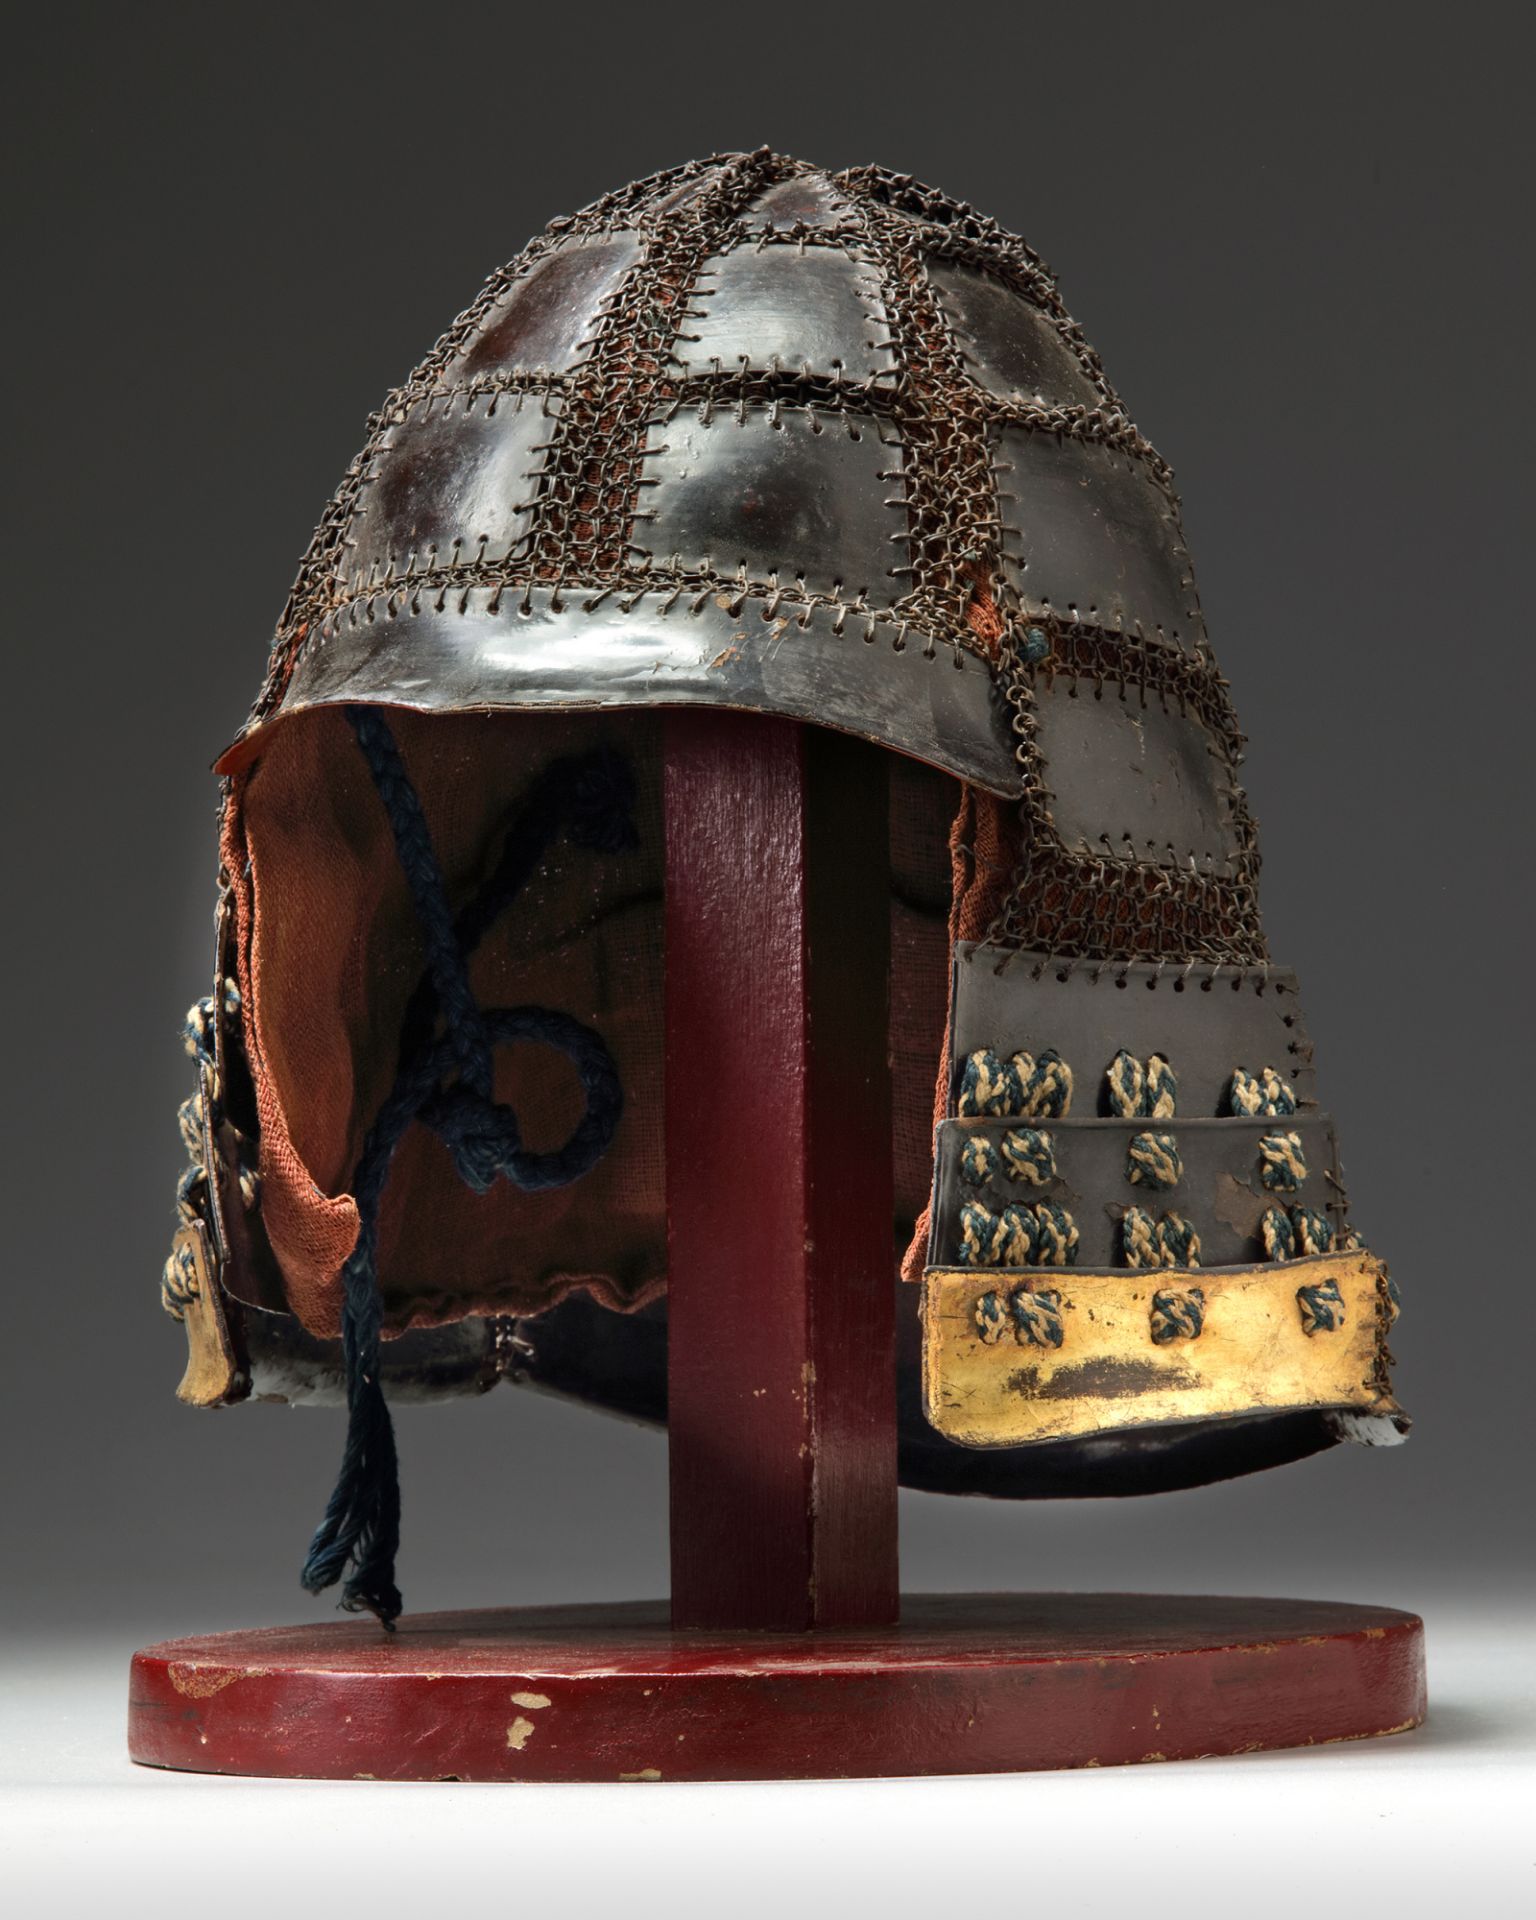 A JAPANESE WARRIOR HELMET (KABUTO) CONSISTING OF BLACK LACQUERED METAL PLATES - Image 4 of 4